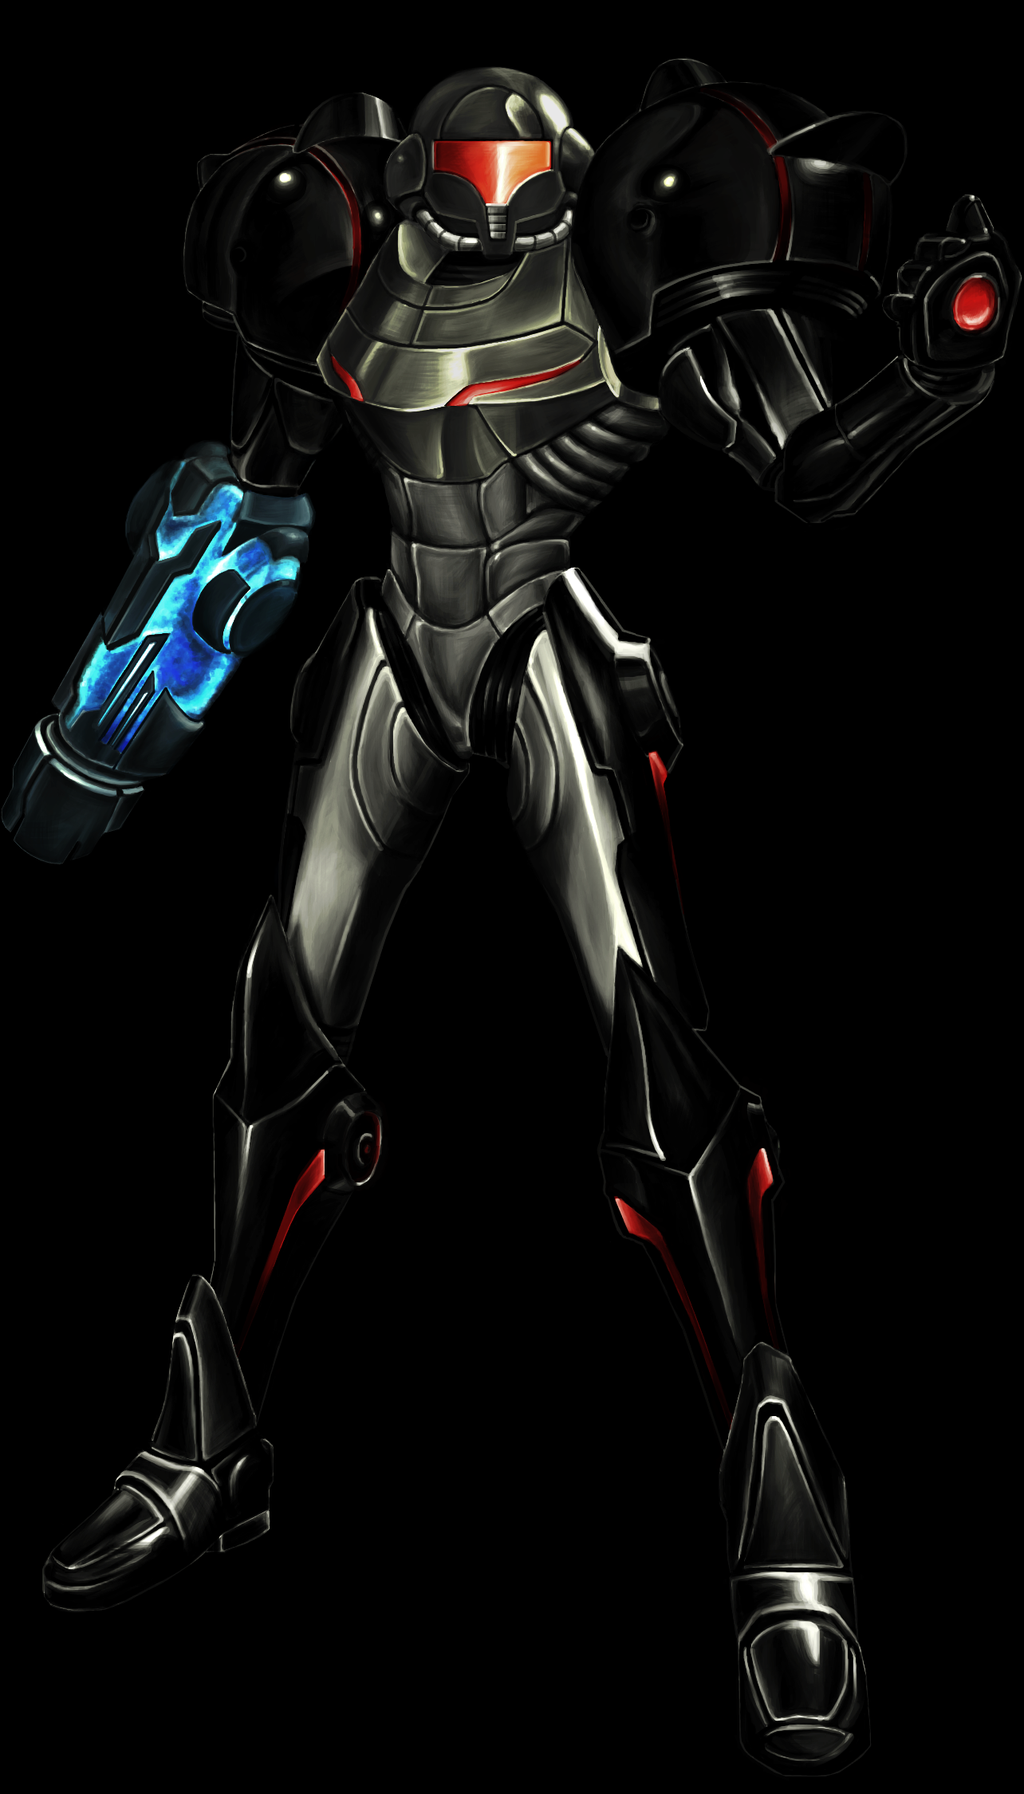 phazon_suit_samus_by_boxedwater-d3dnhbw.png.